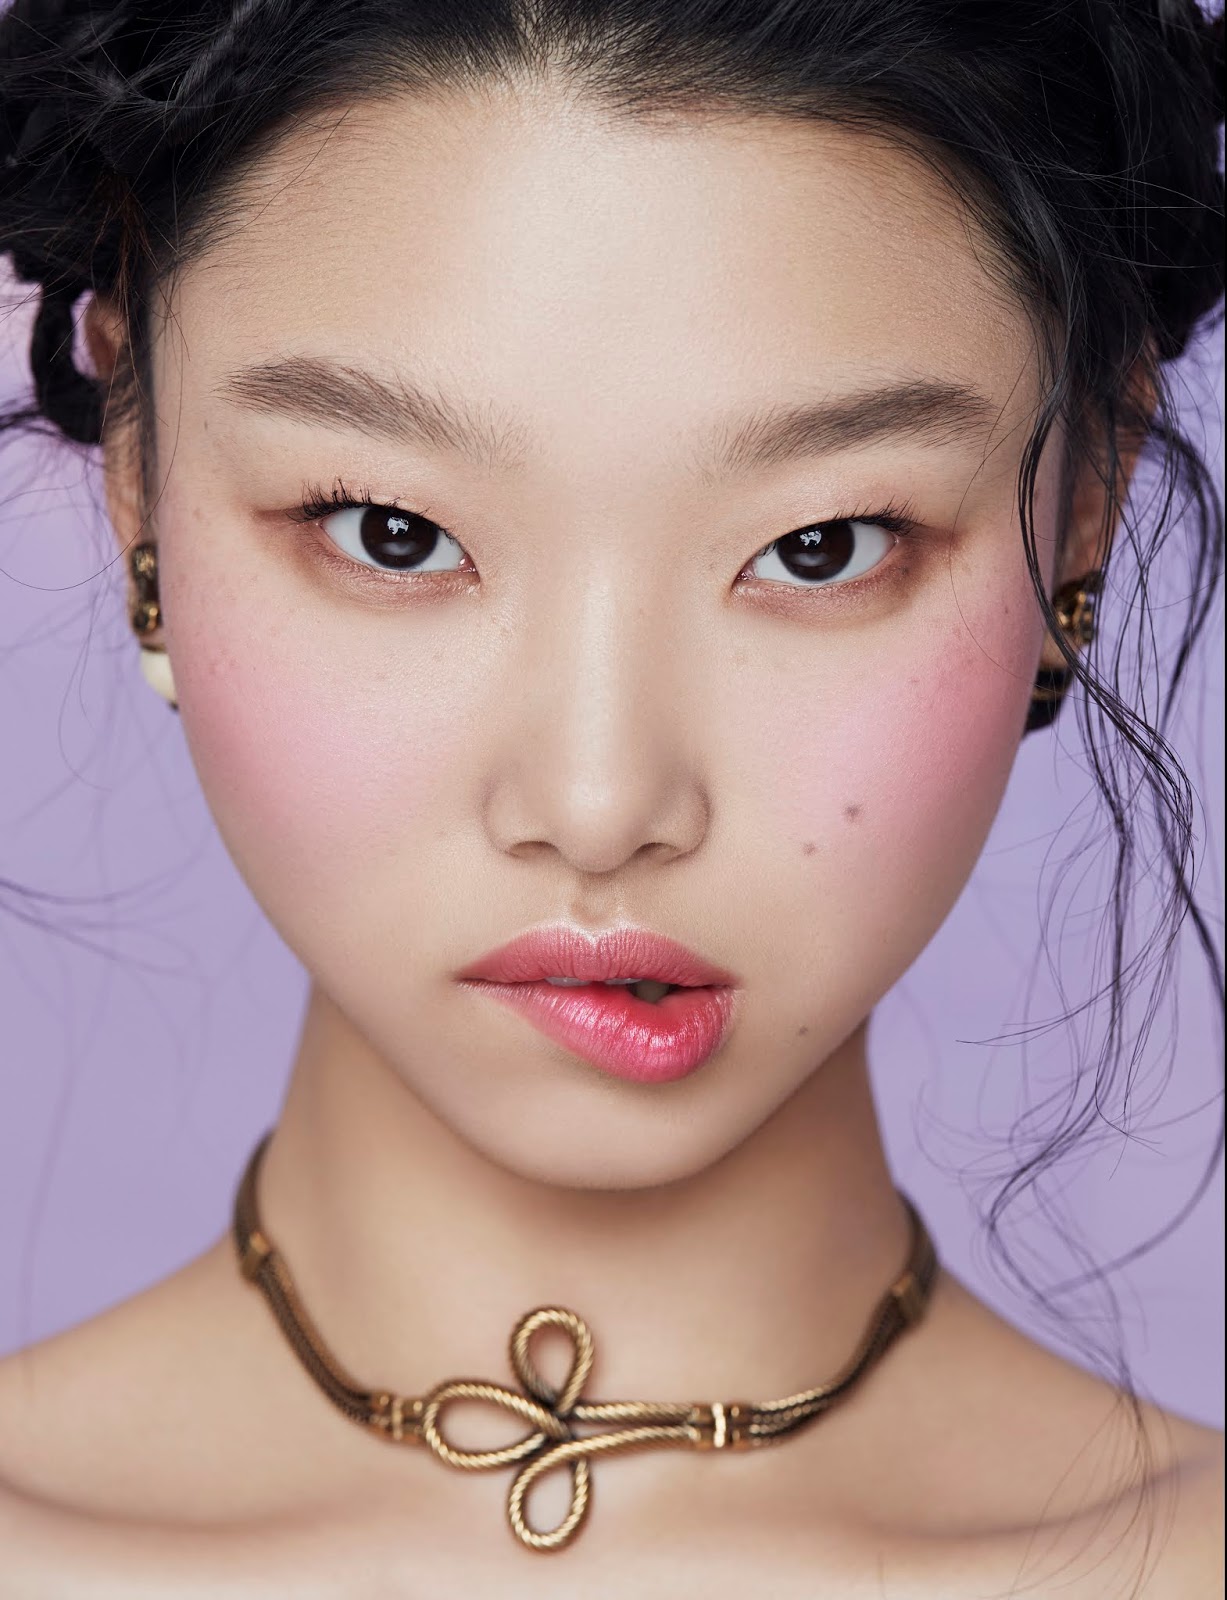 agencygarten: 2019 MARCH DAZED HAIRSTYLING BY LEE HYE-YOUNG